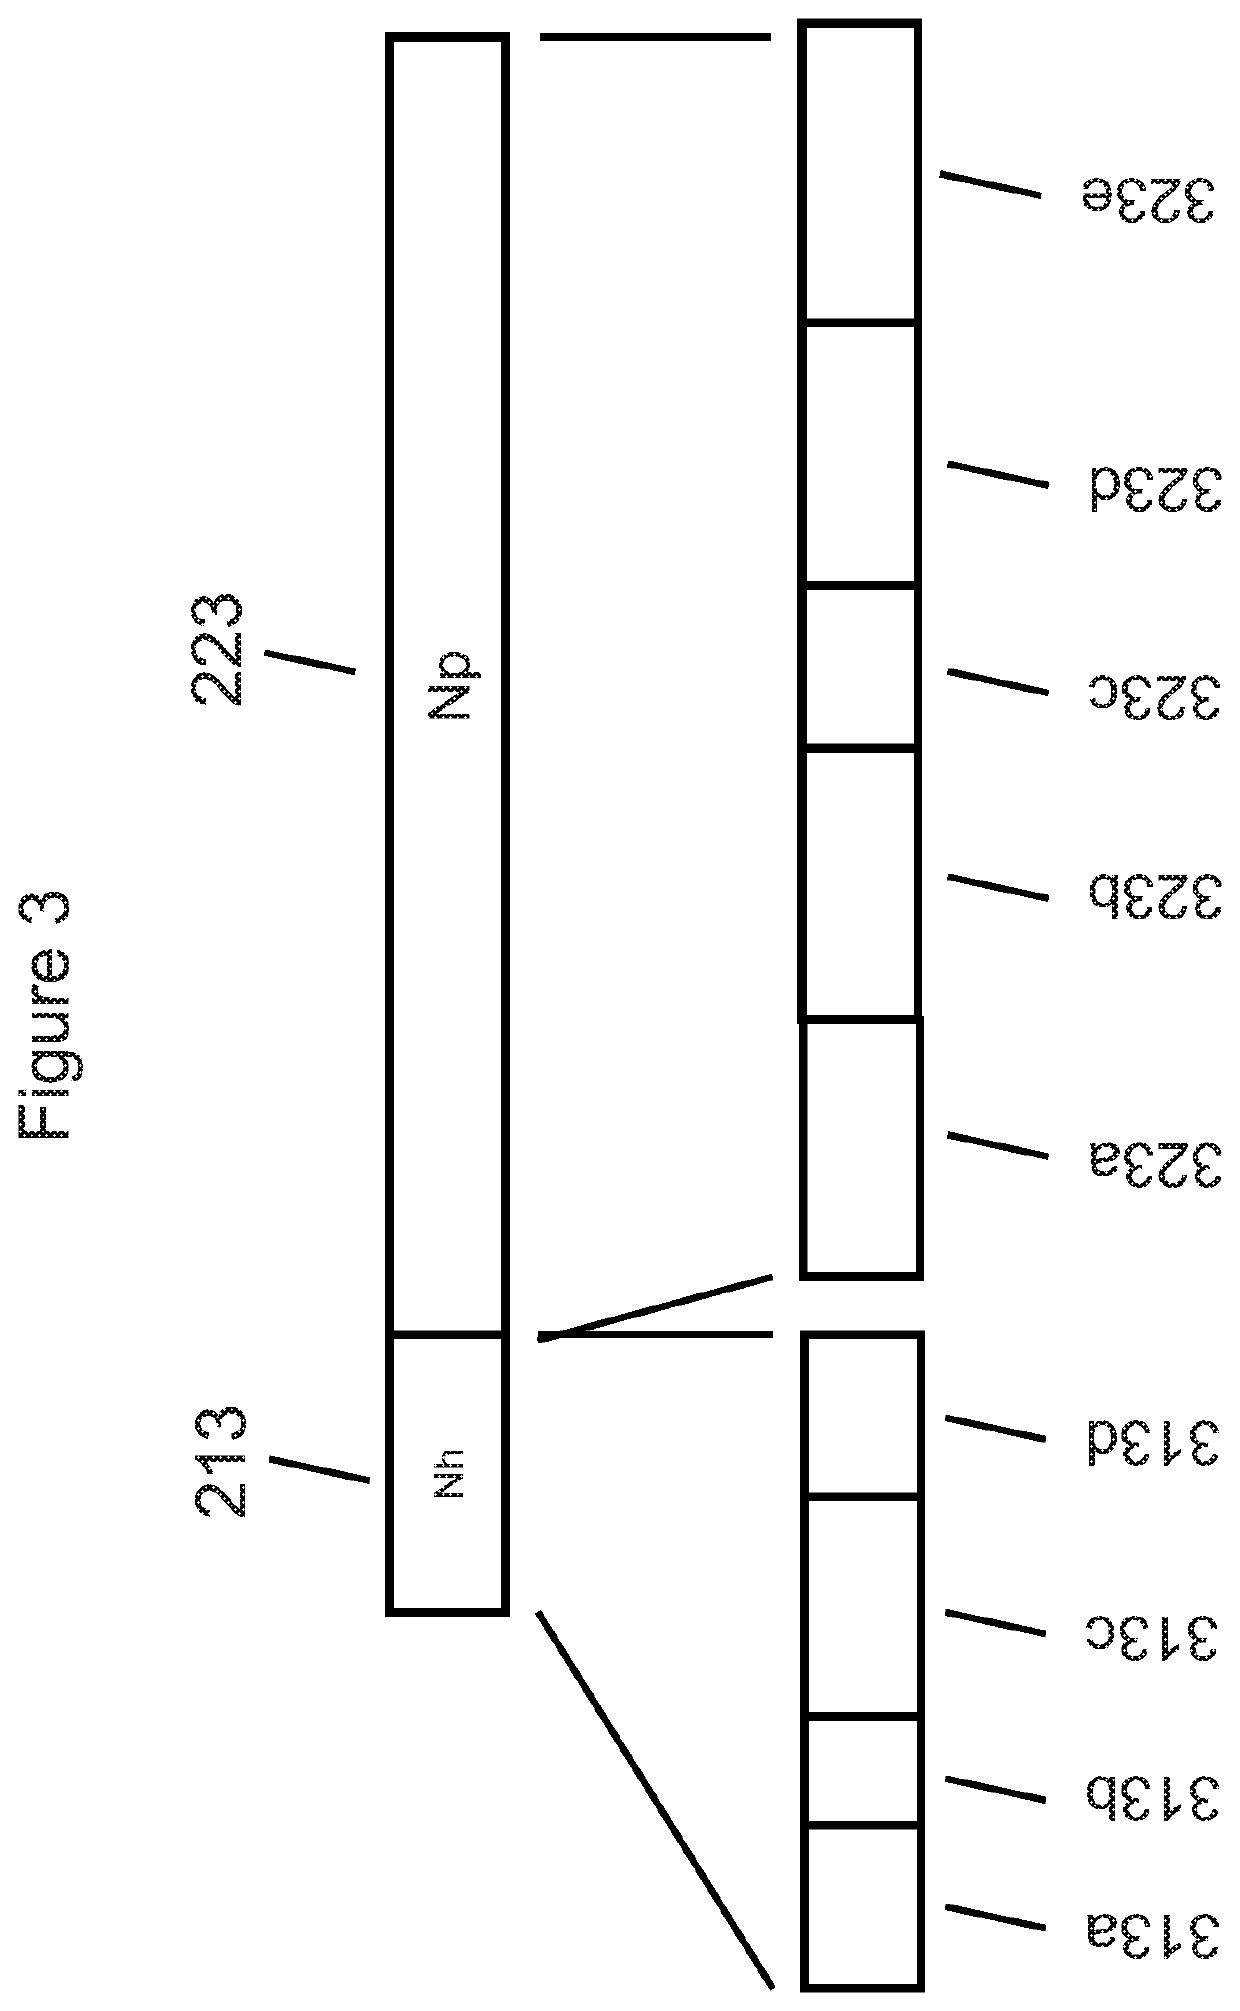 Storage access interface to an encoded storage system